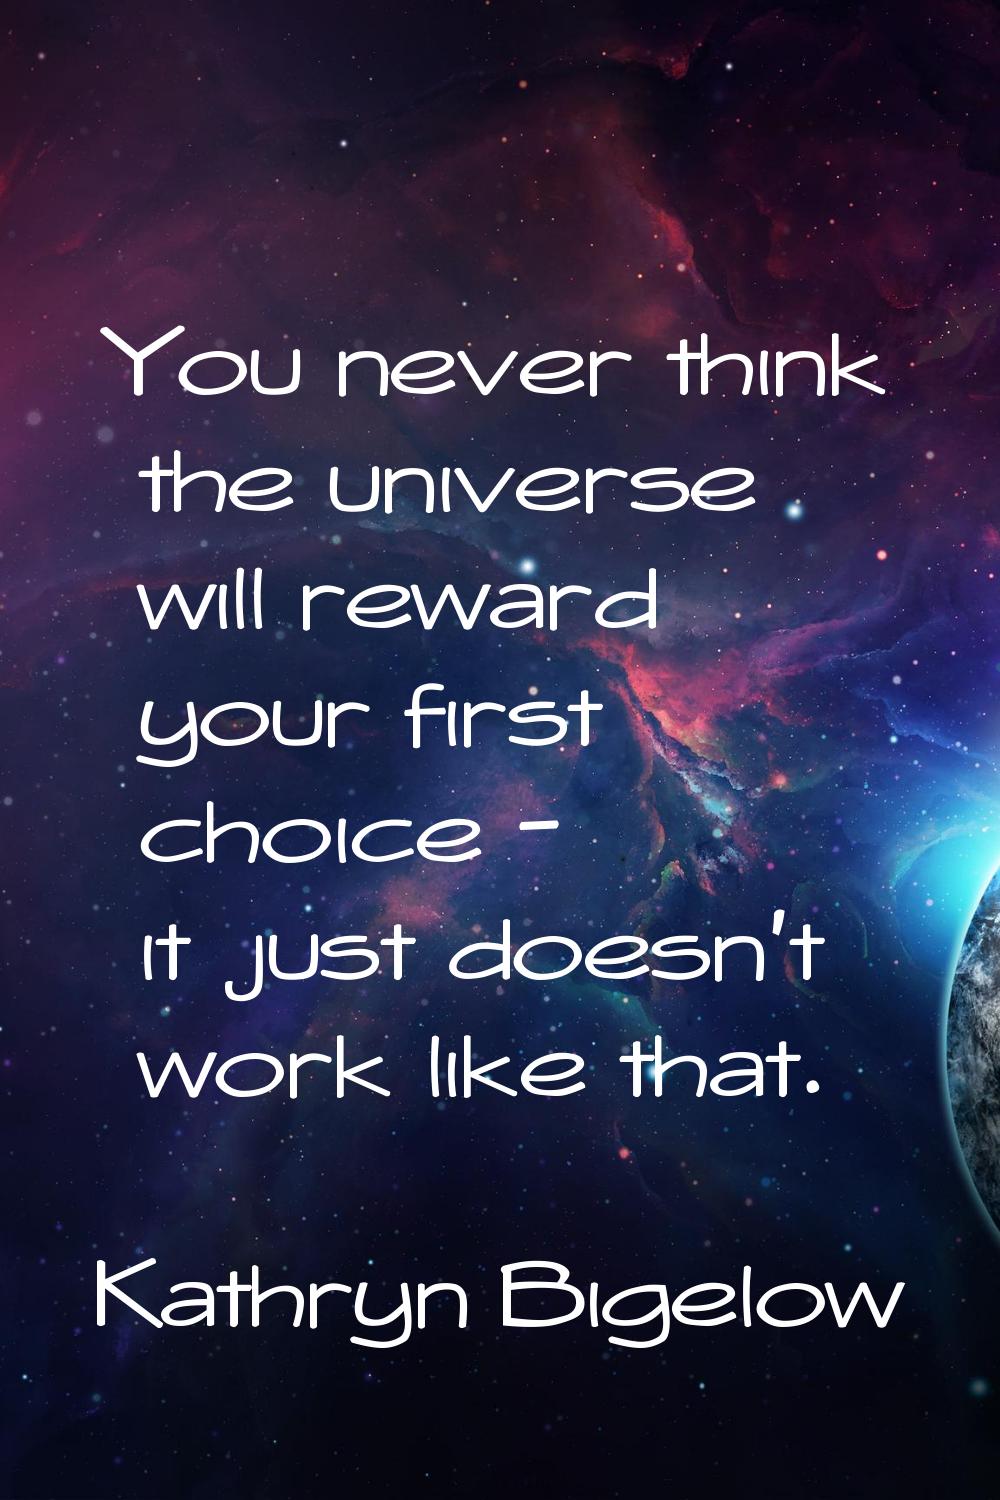 You never think the universe will reward your first choice - it just doesn't work like that.